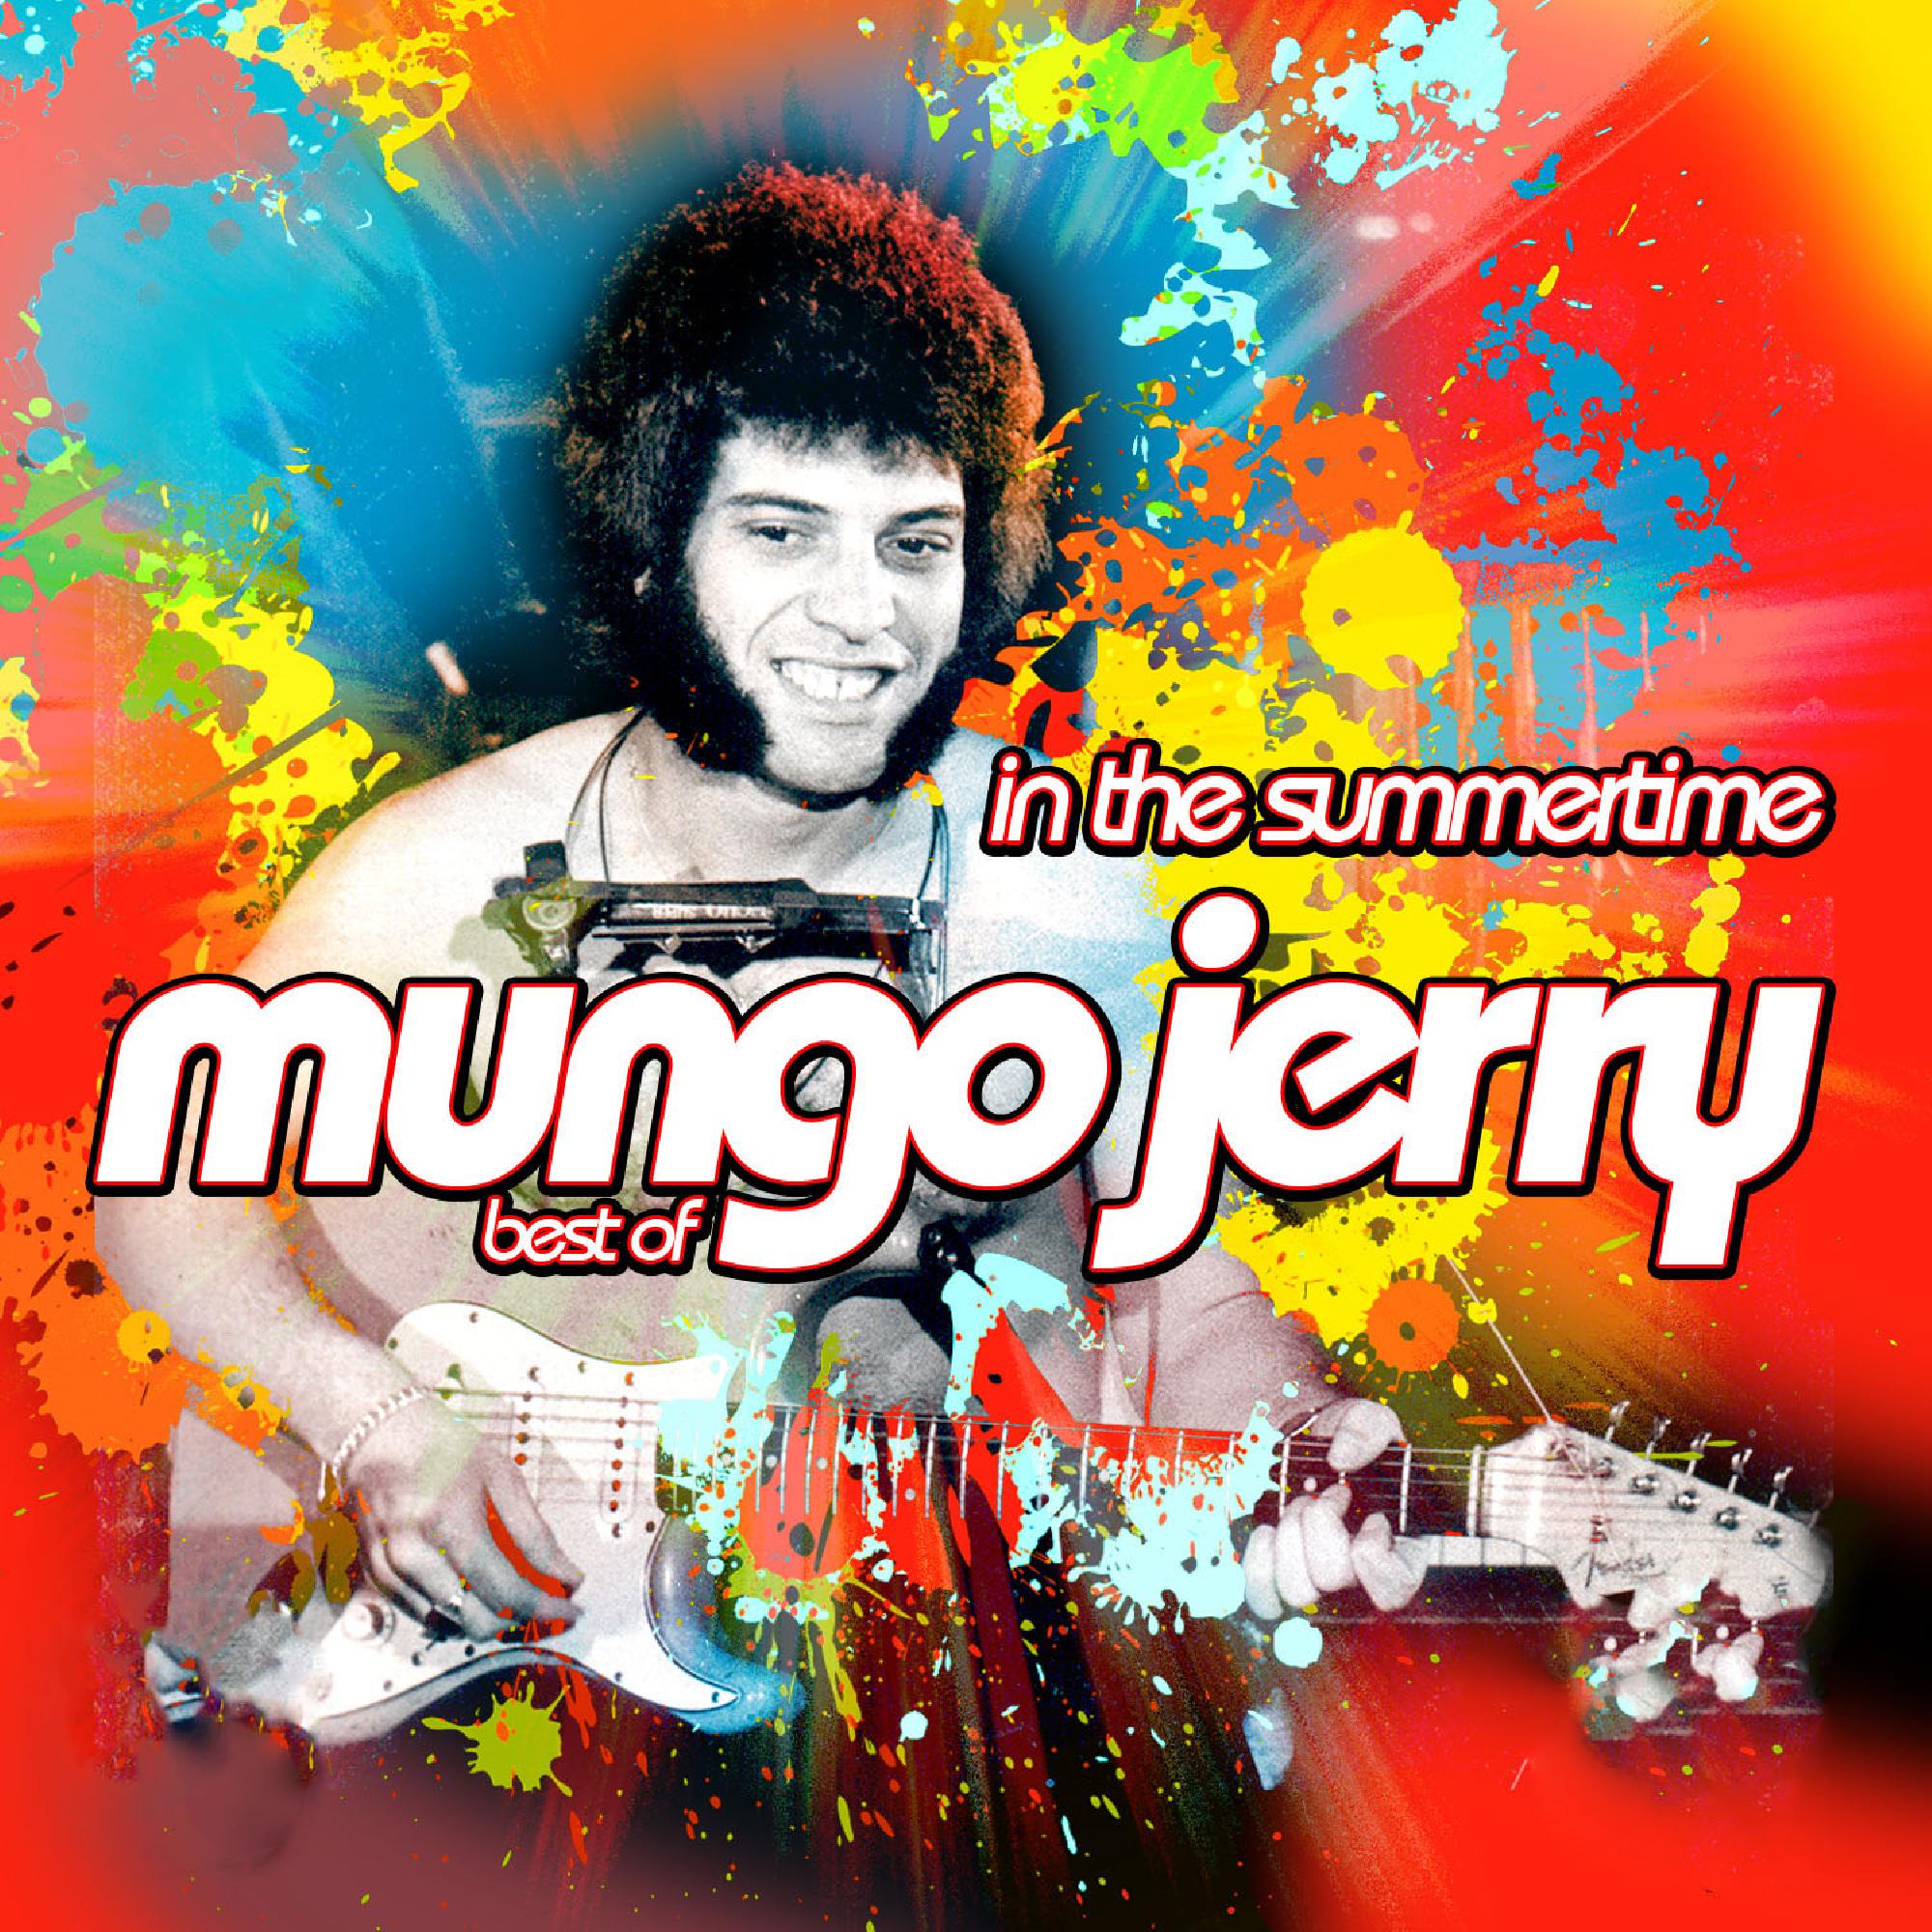 Mungo jerry in the summertime. Обложка Mungo Jerry Summertime. Mungo Jerry in the Summertime 1970. Mungo Jerry LP. Mungo Jerry Mungo Jerry.